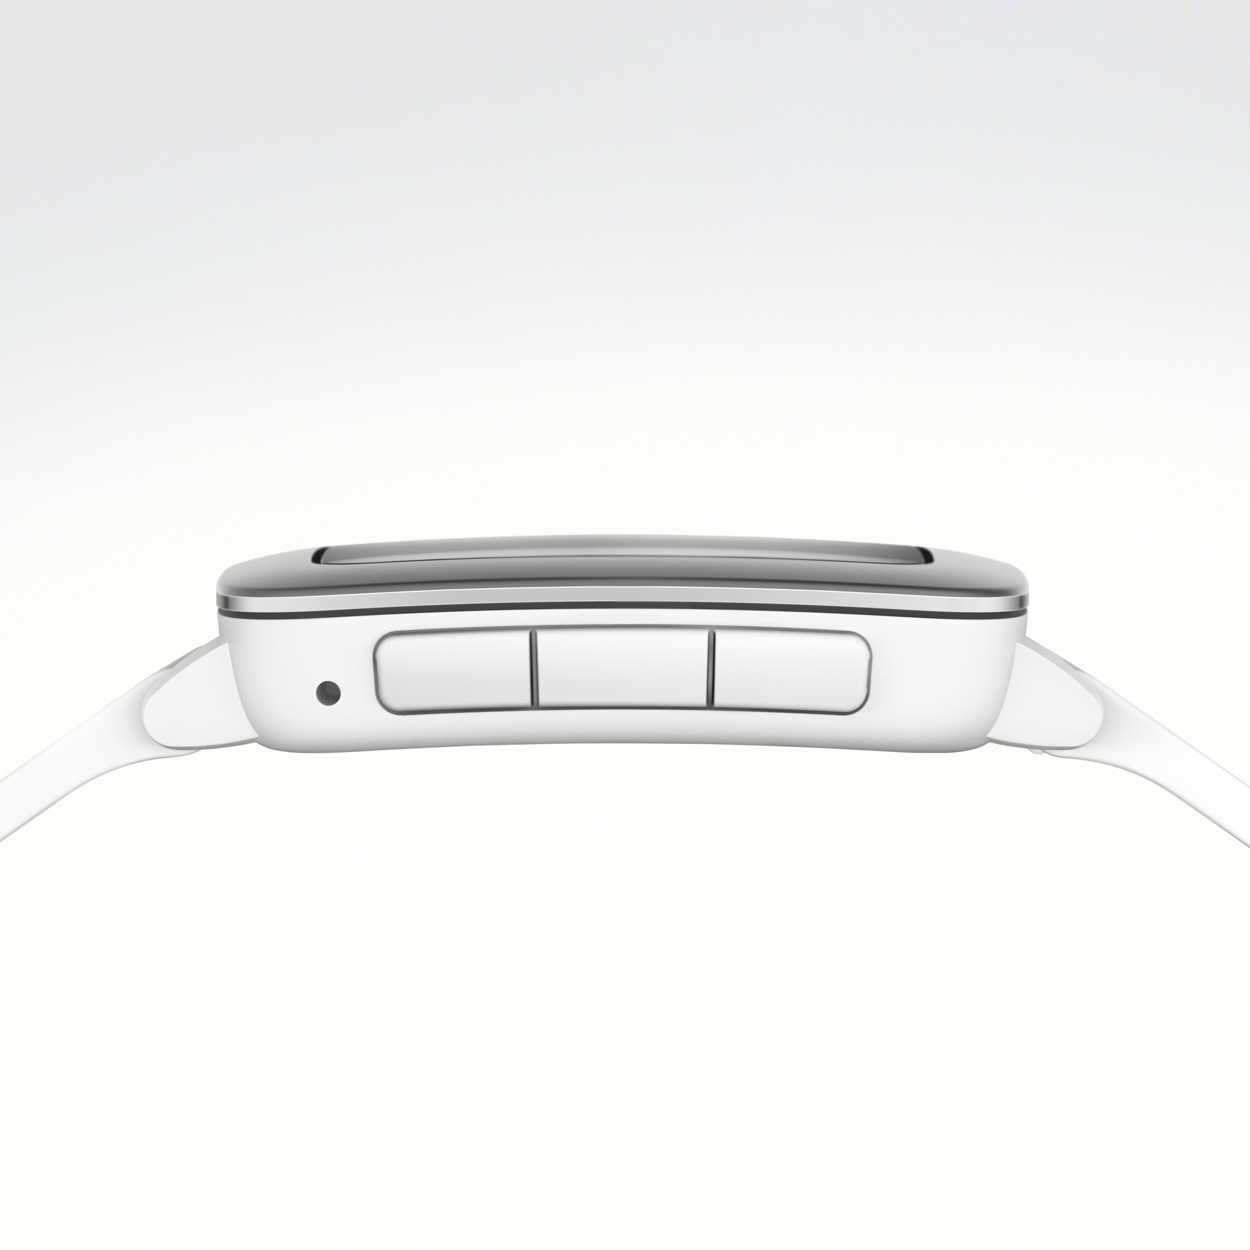 A side profile of the Pebble Time